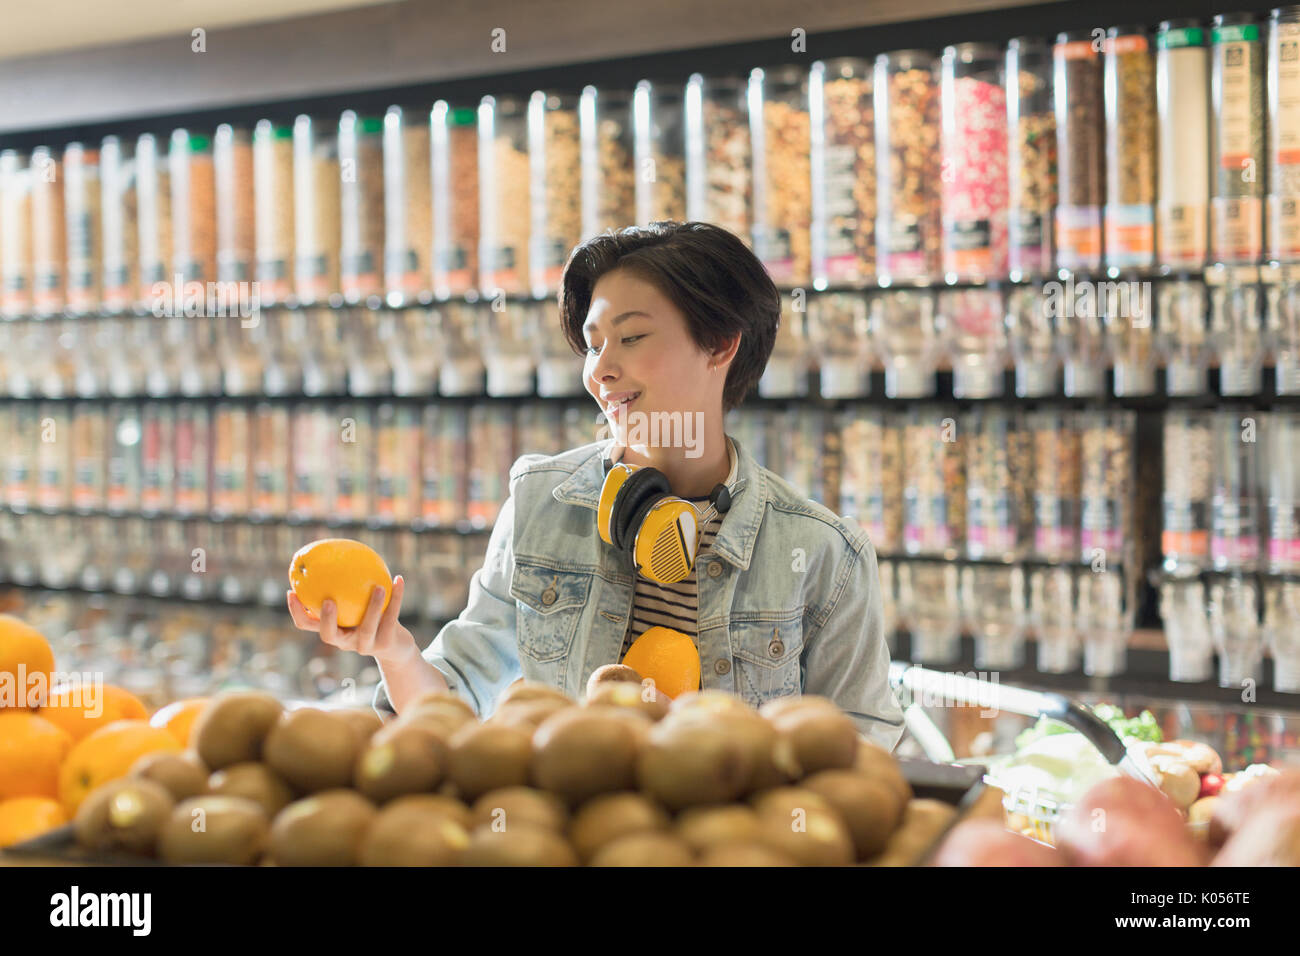 Young woman with headphones grocery shopping, holding orange in market Stock Photo